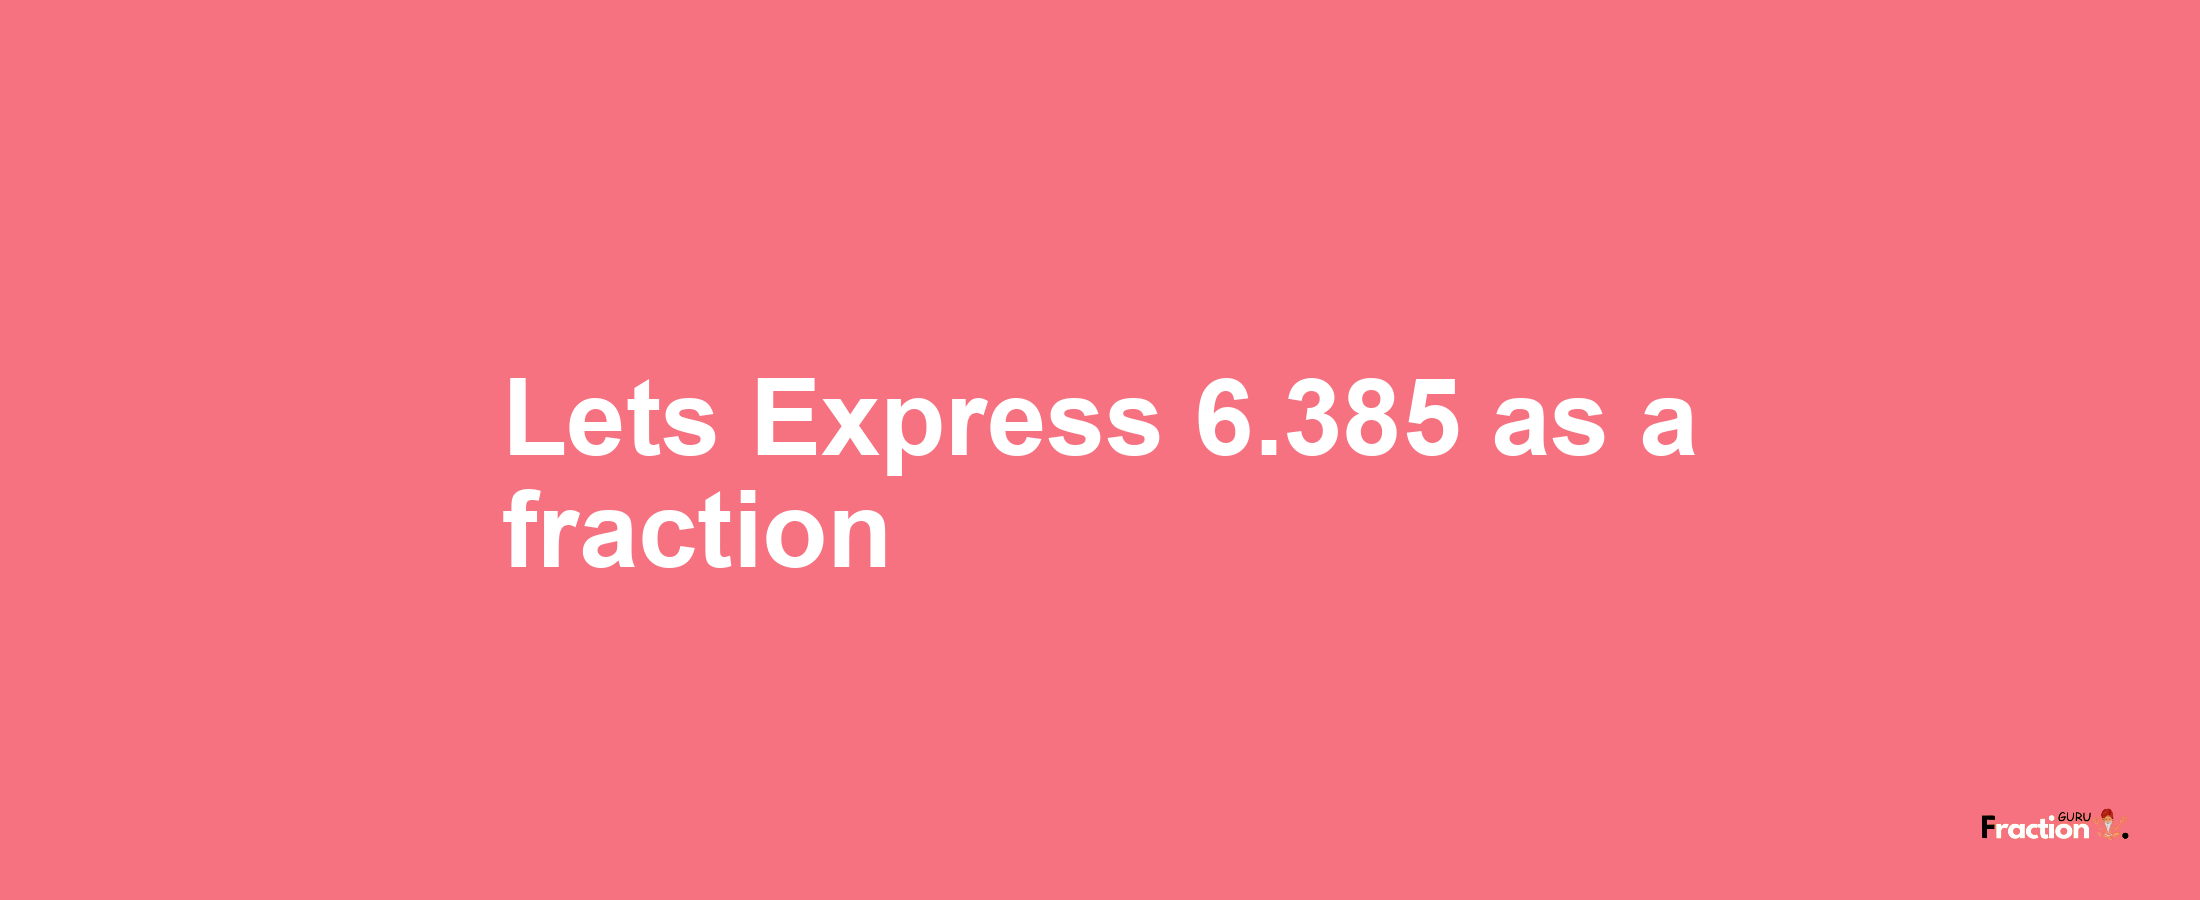 Lets Express 6.385 as afraction